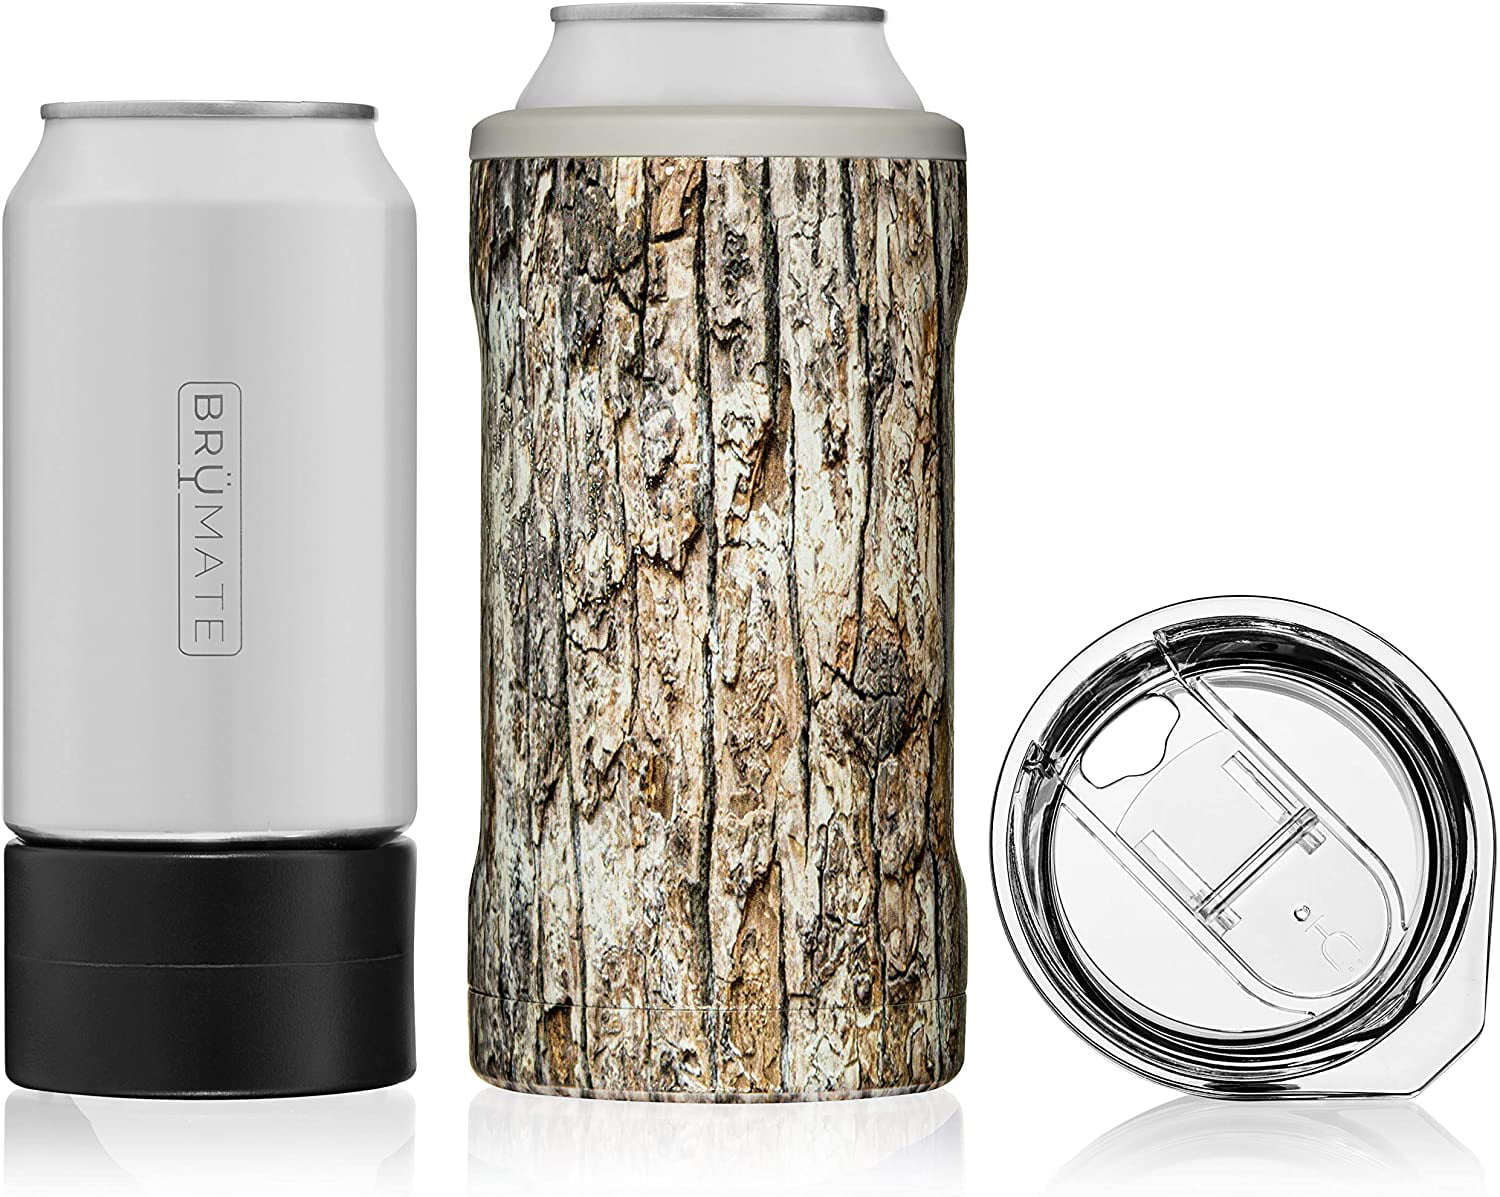 3D Camo Works With 12 Oz 16 Oz Cans And As A Pint Glass BrüMate HOPSULATOR TRíO 3-in-1 Stainless Steel Insulated Can Cooler